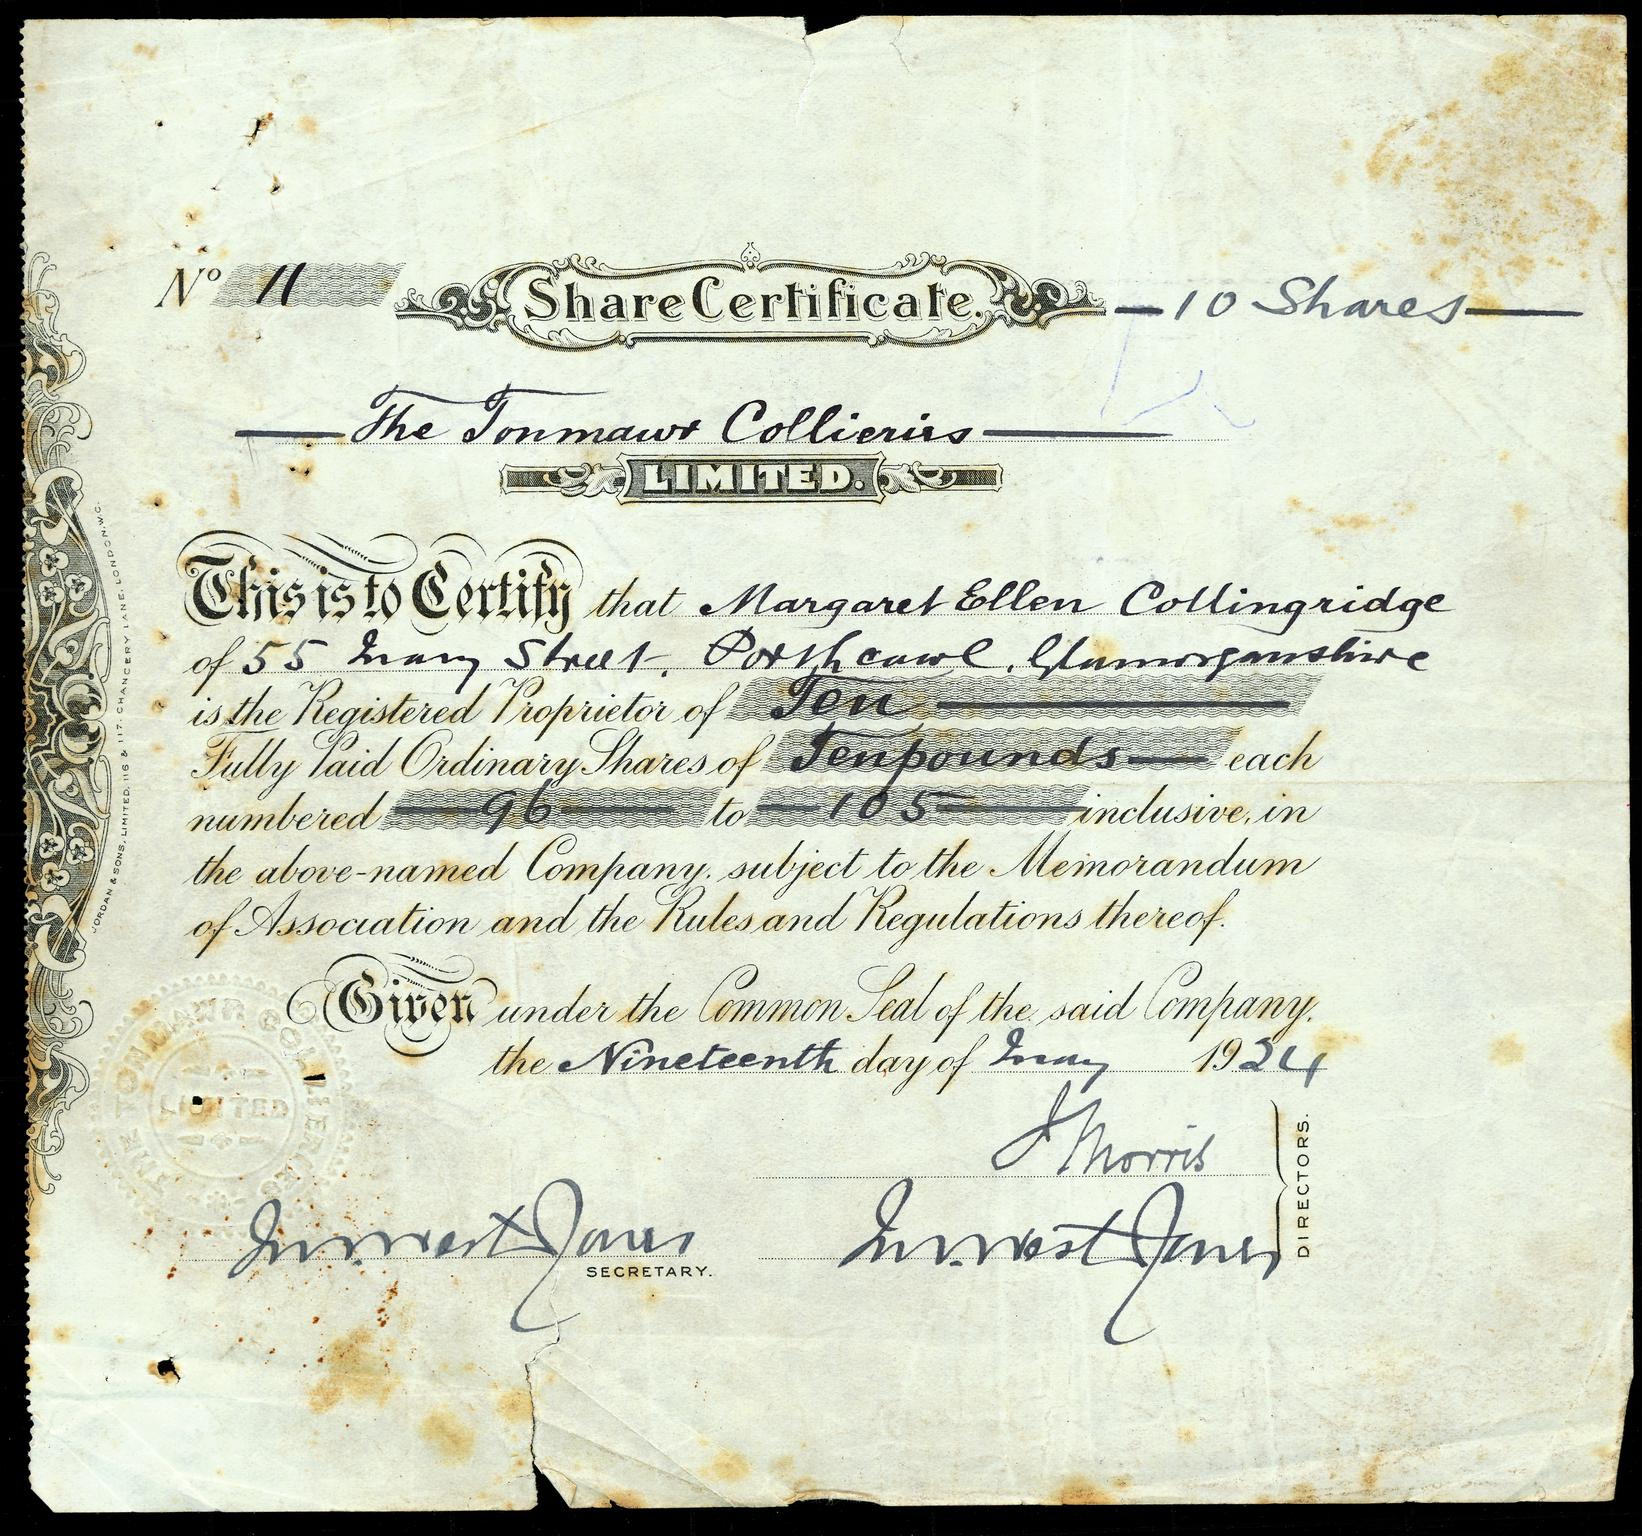 Tonmawr Collieries Limited, share certificate